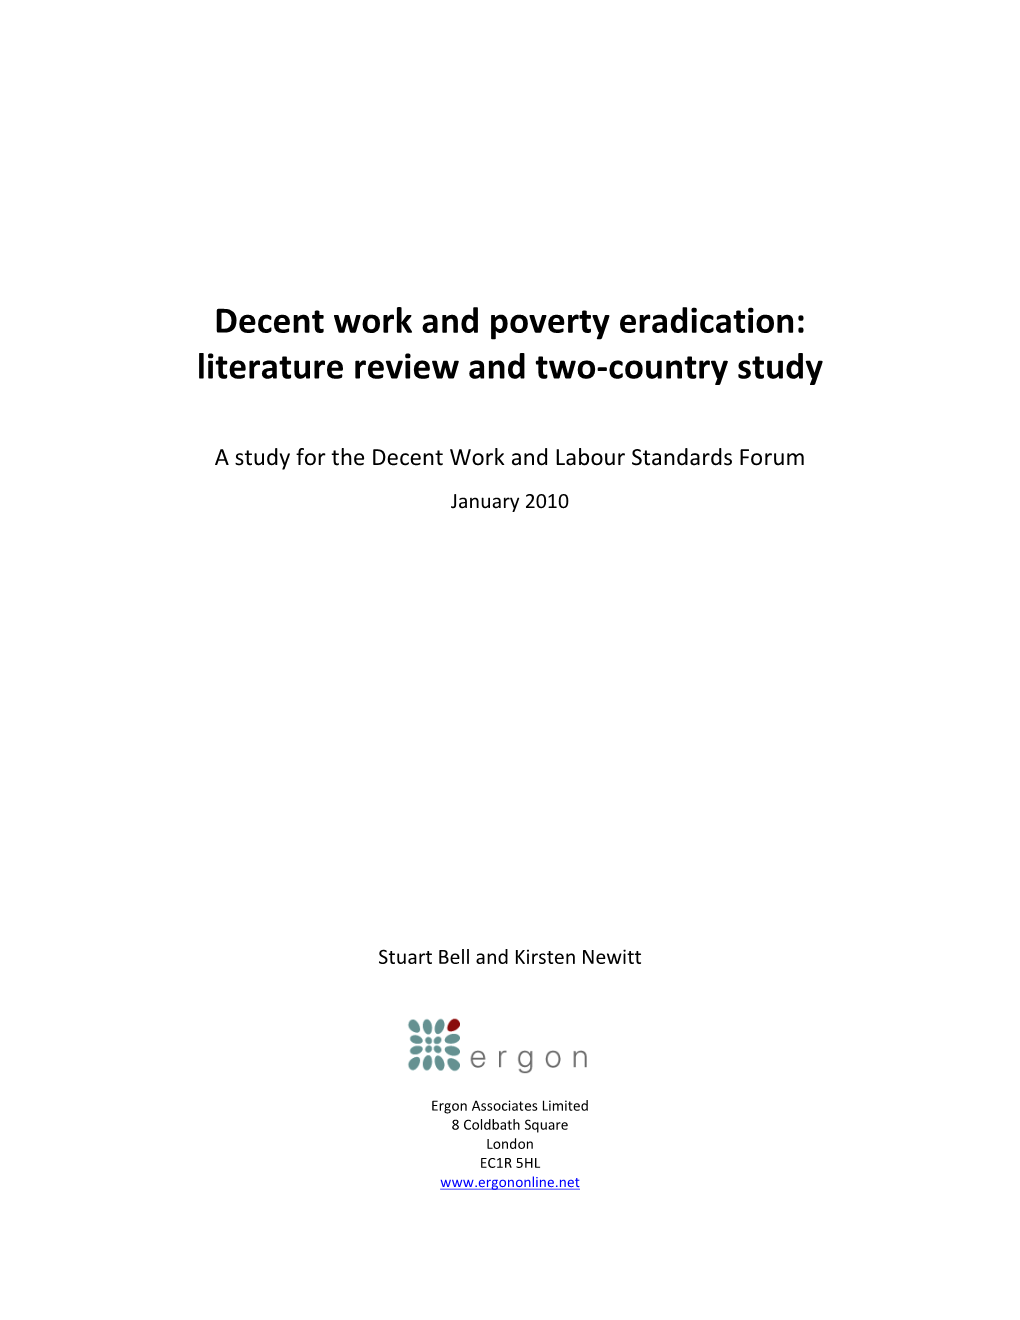 Decent Work and Poverty Eradication: Literature Review and Two-Country Study